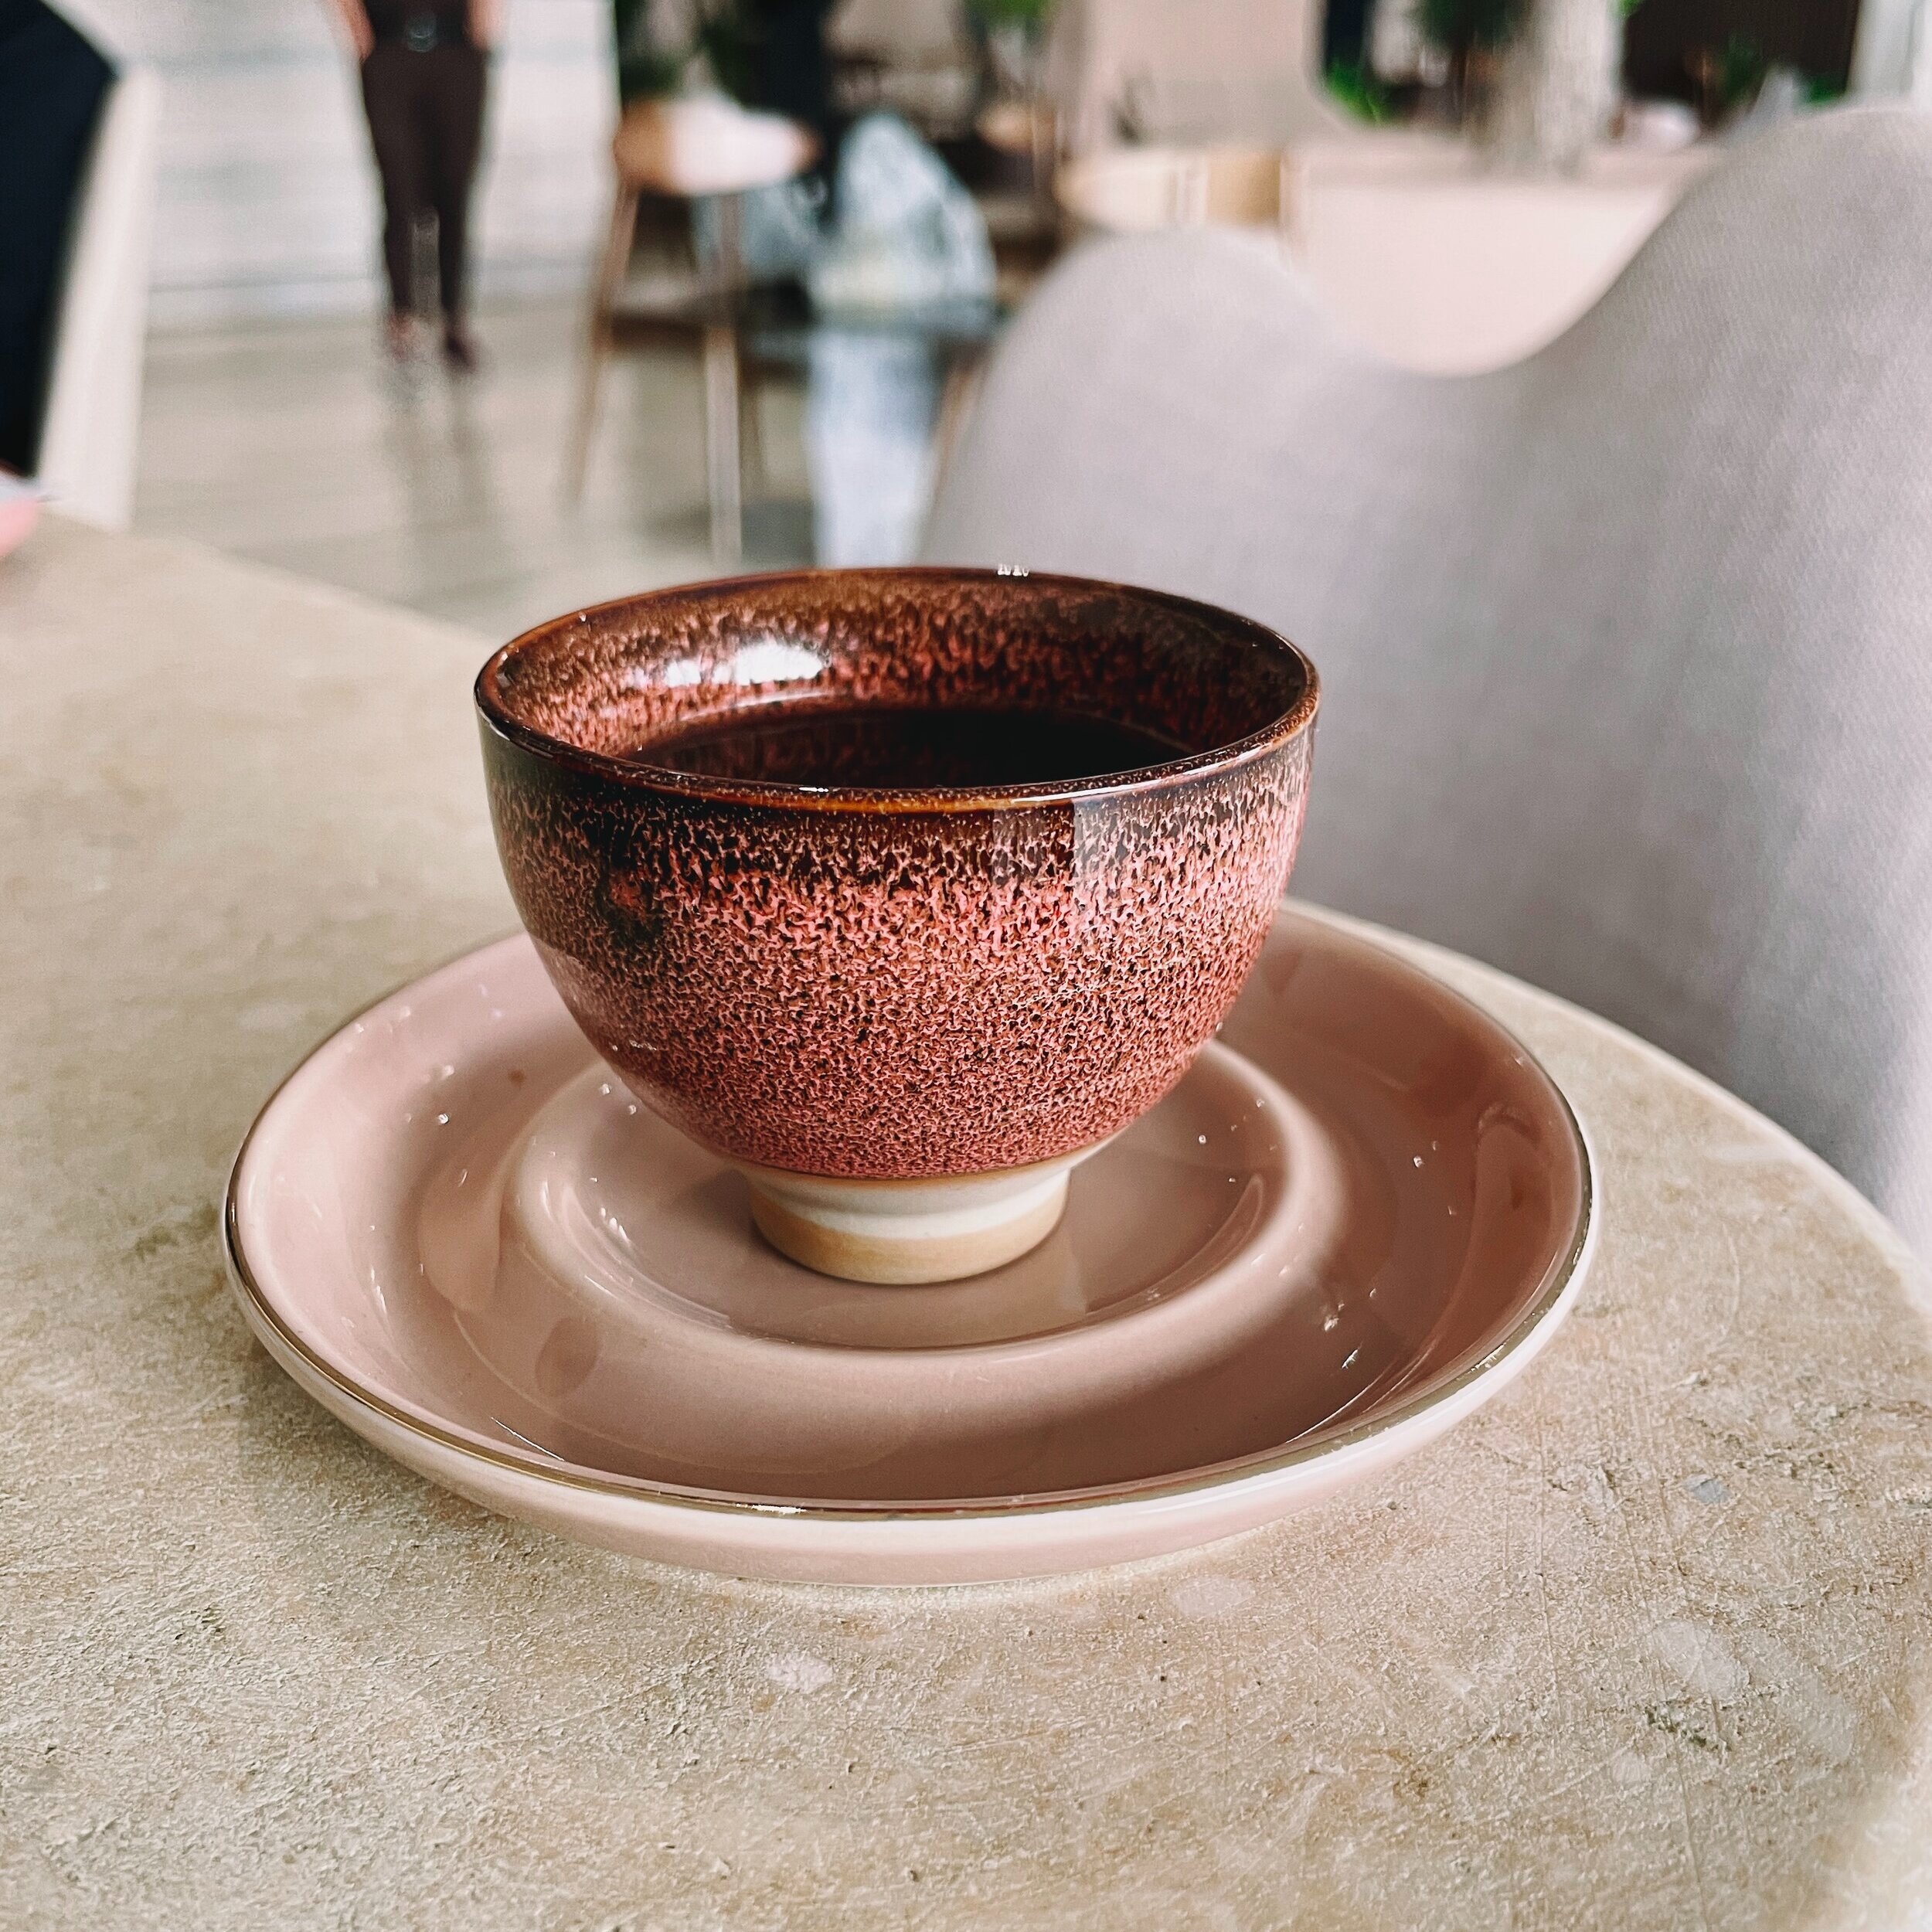 Ethiopian Coffee poured in this beautiful ceramic cup